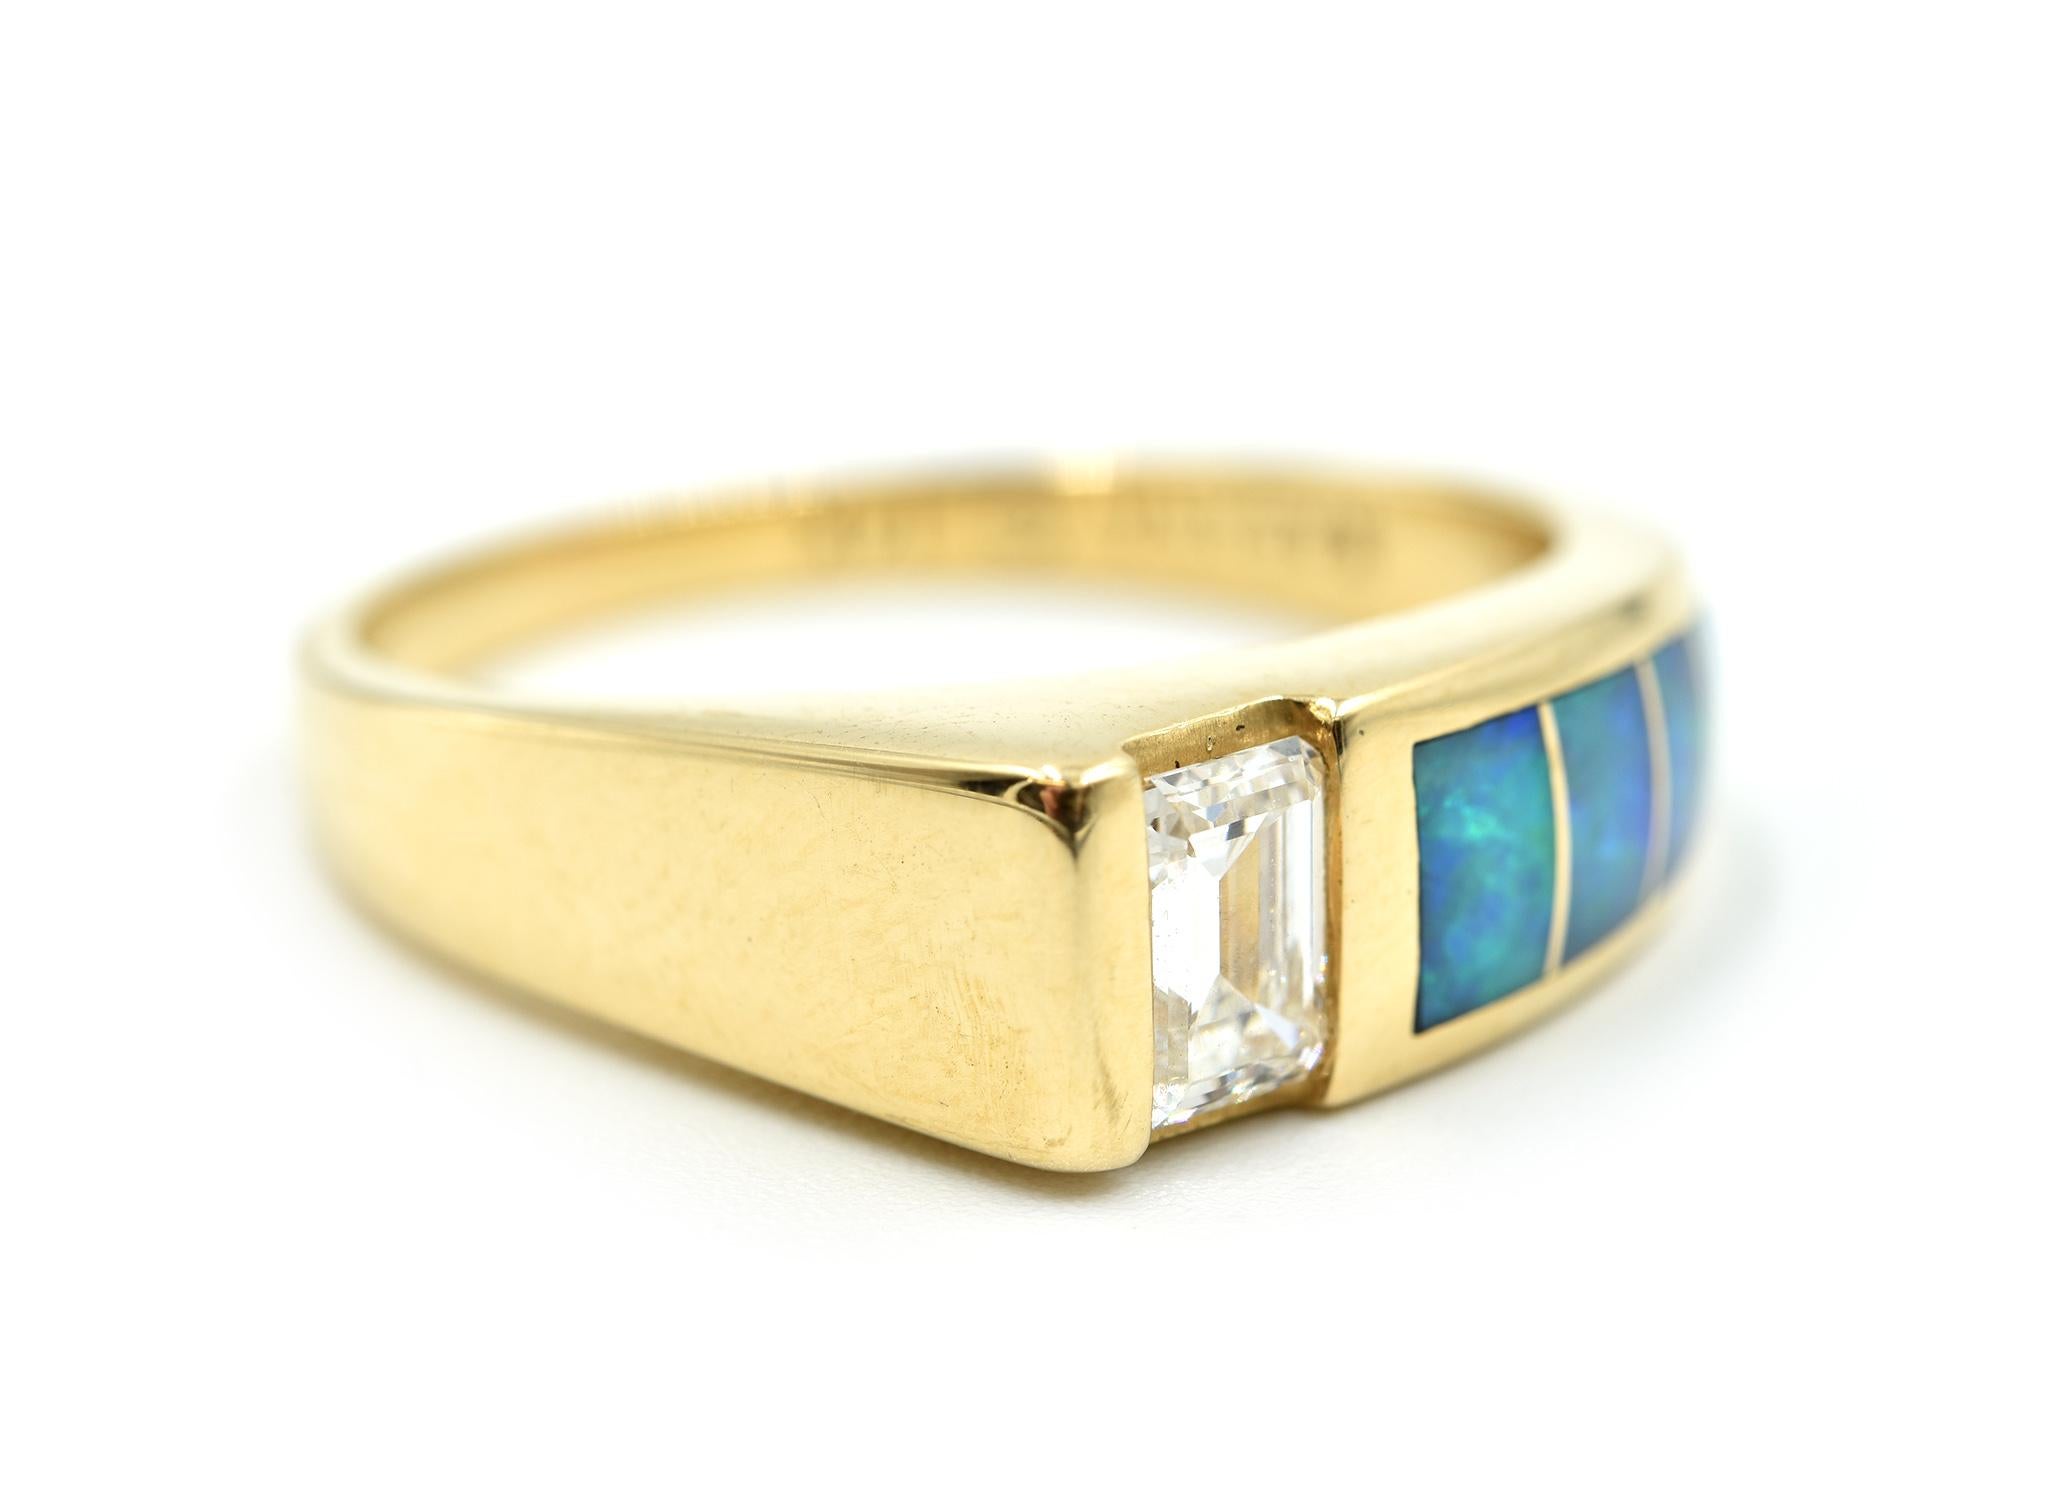 This is a 14k yellow gold band made with a 0.50ct emerald cut diamond and features opal inlays on top! The diamond is graded G in color and VS2 in clarity. Each of the opals graduate in size on the band. The top of the band measures 21mm in length